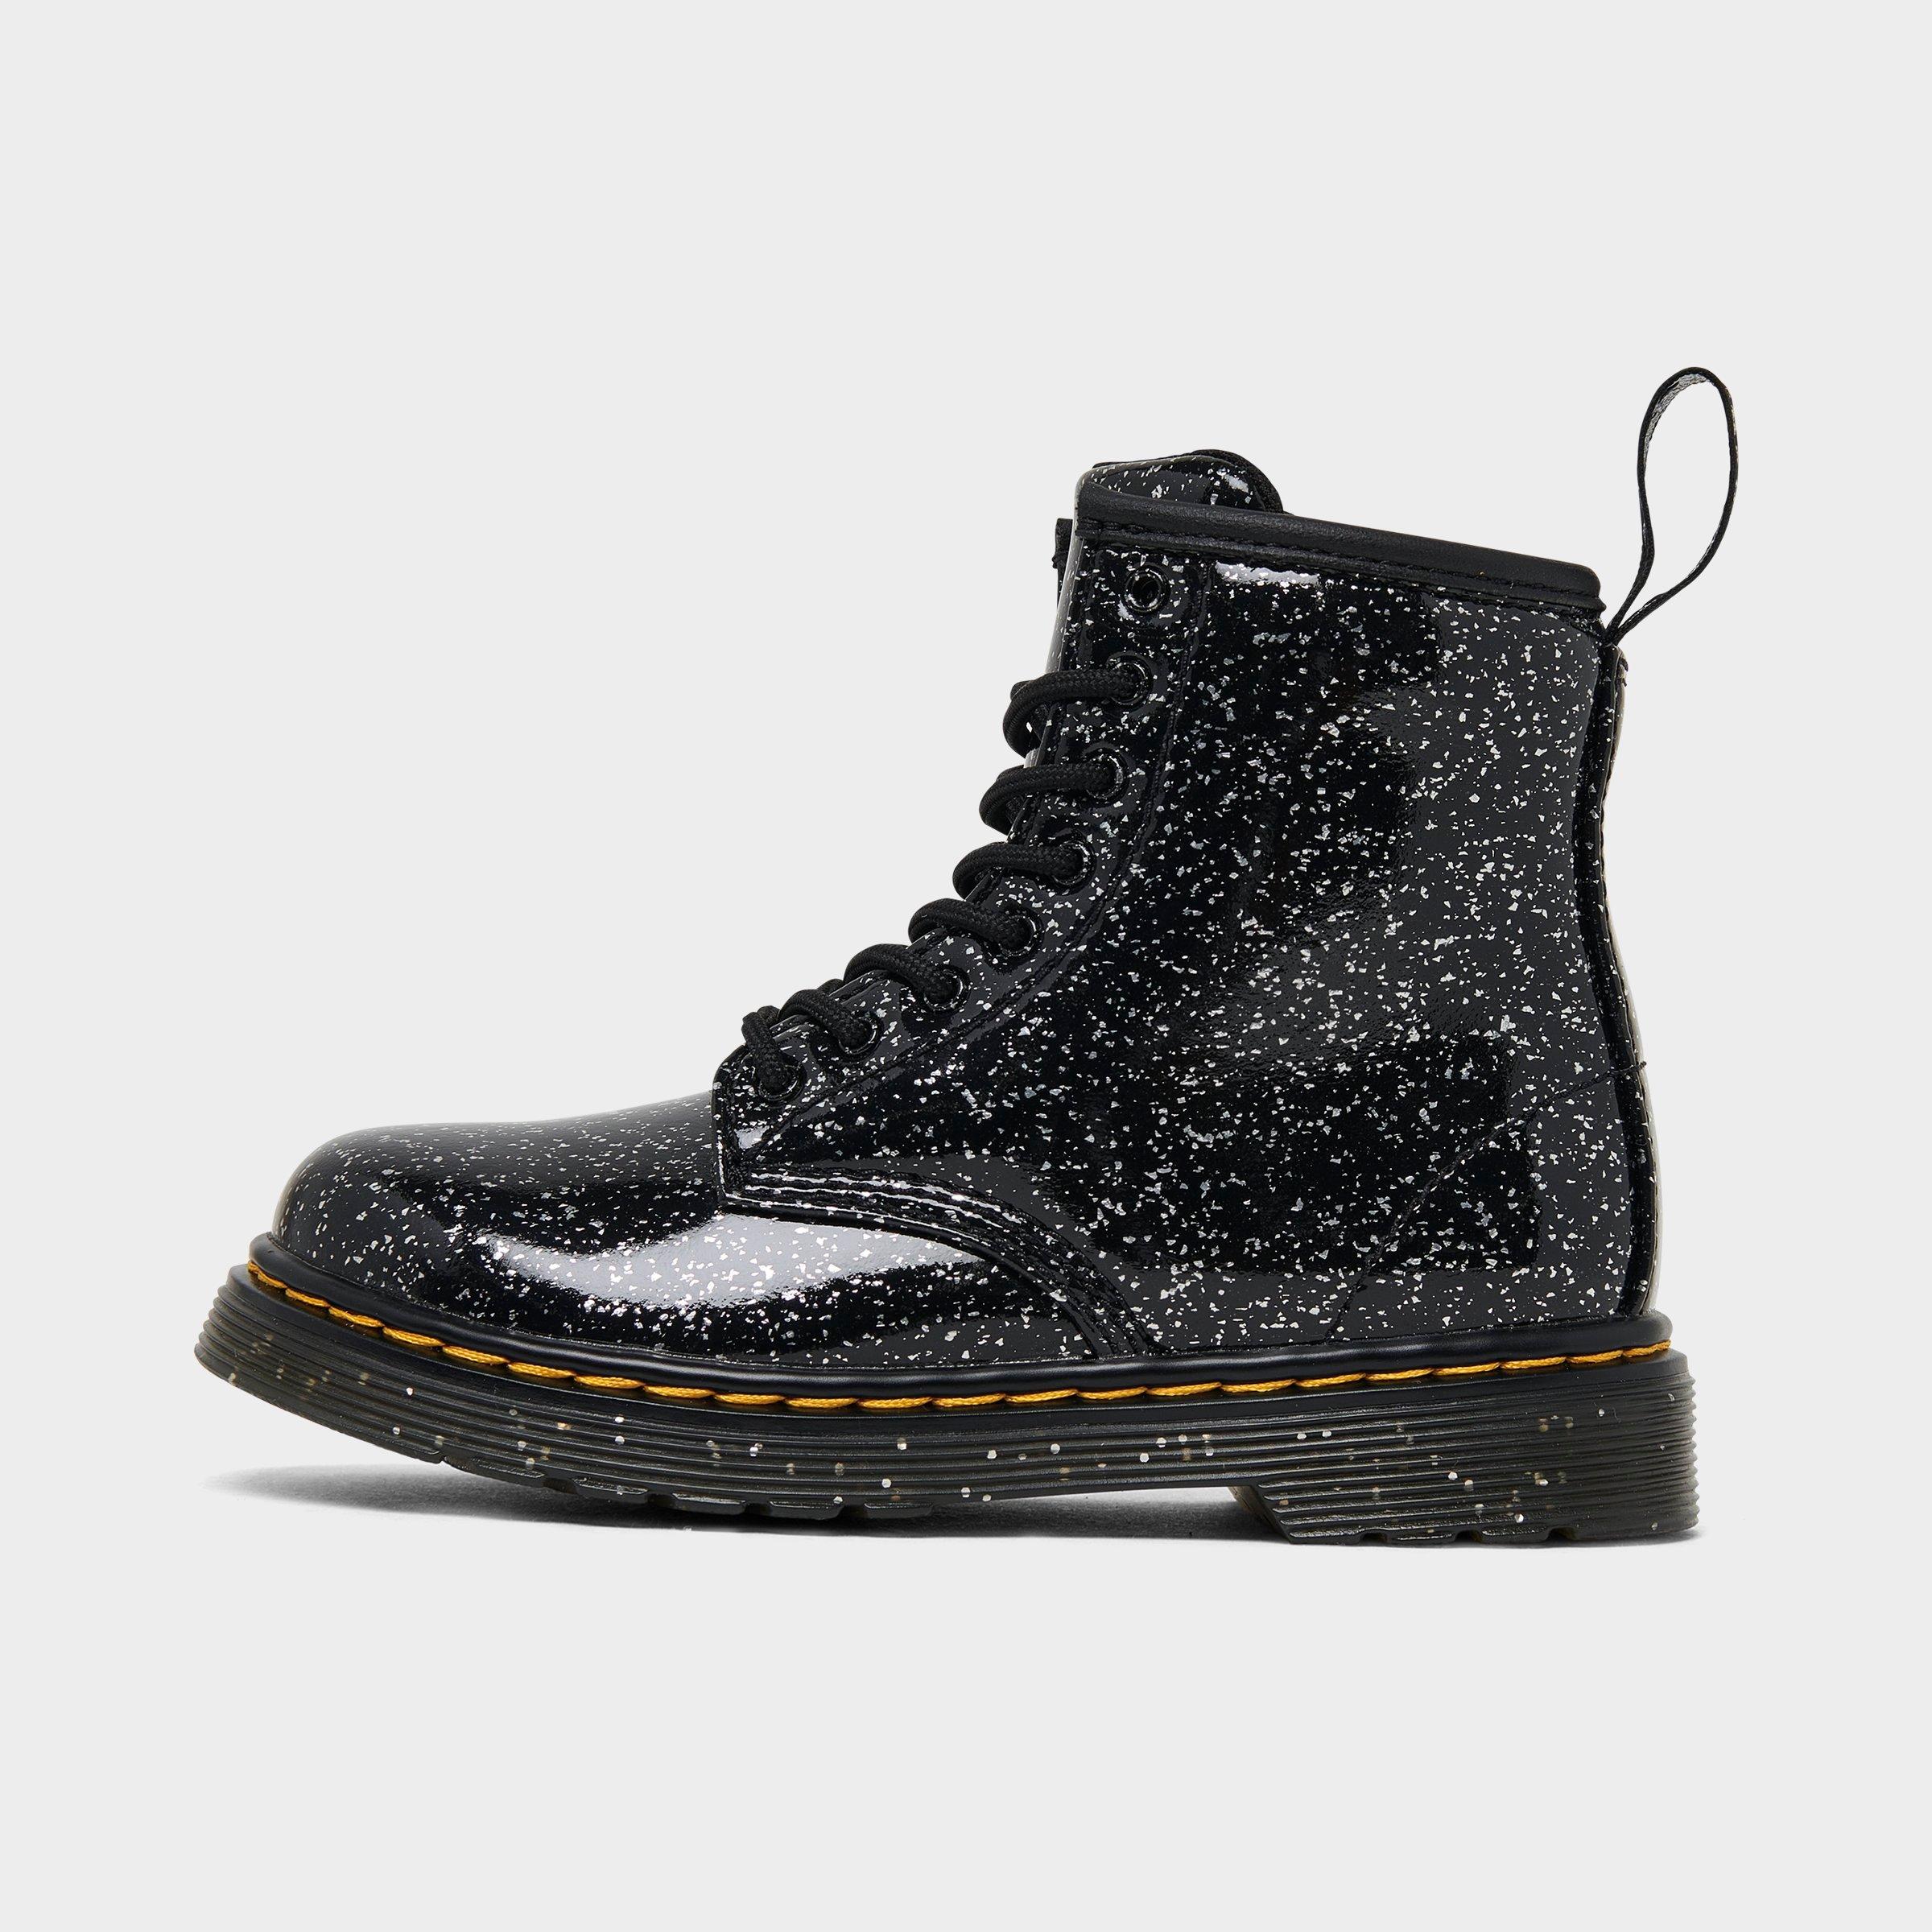 Dr. Martens' Babies' Dr. Martens Girls' Toddler 1460 Softy T Leather Boots In Black Cosmic Glitter